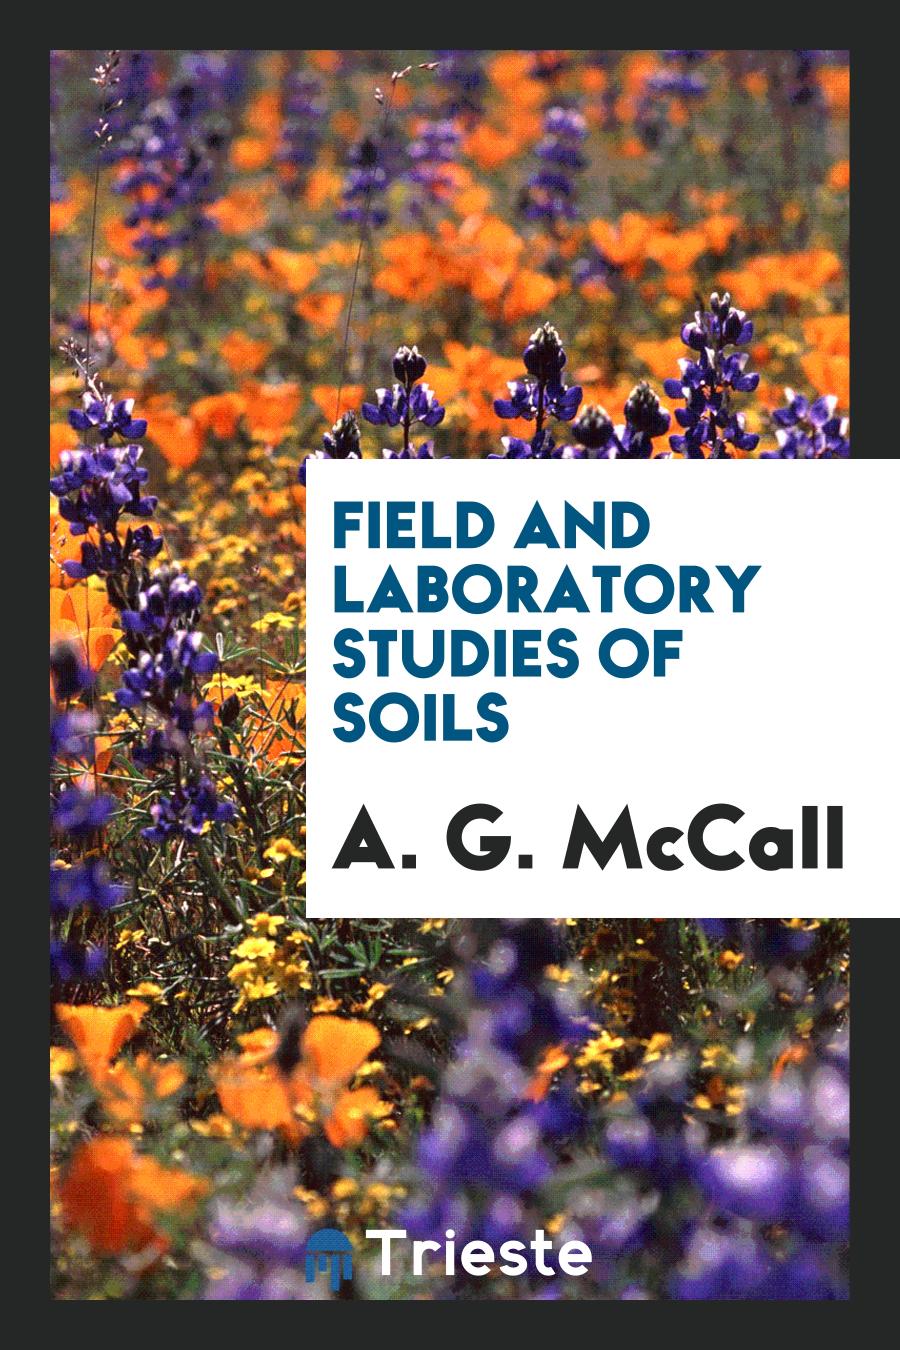 Field and Laboratory Studies of Soils